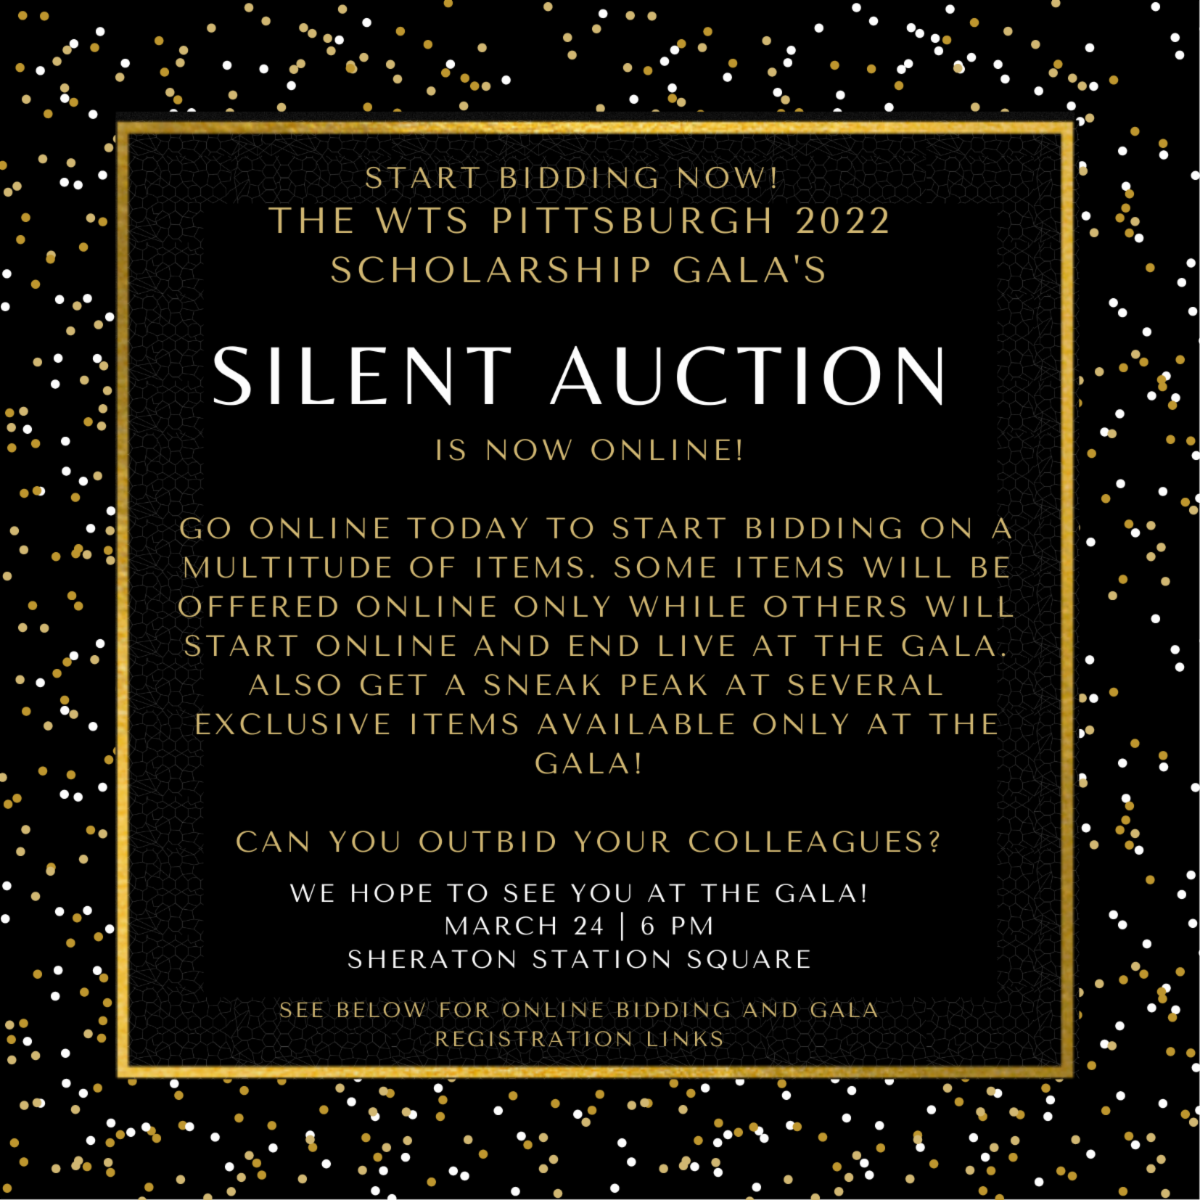 WTS PGH Gala Silent Auction Information